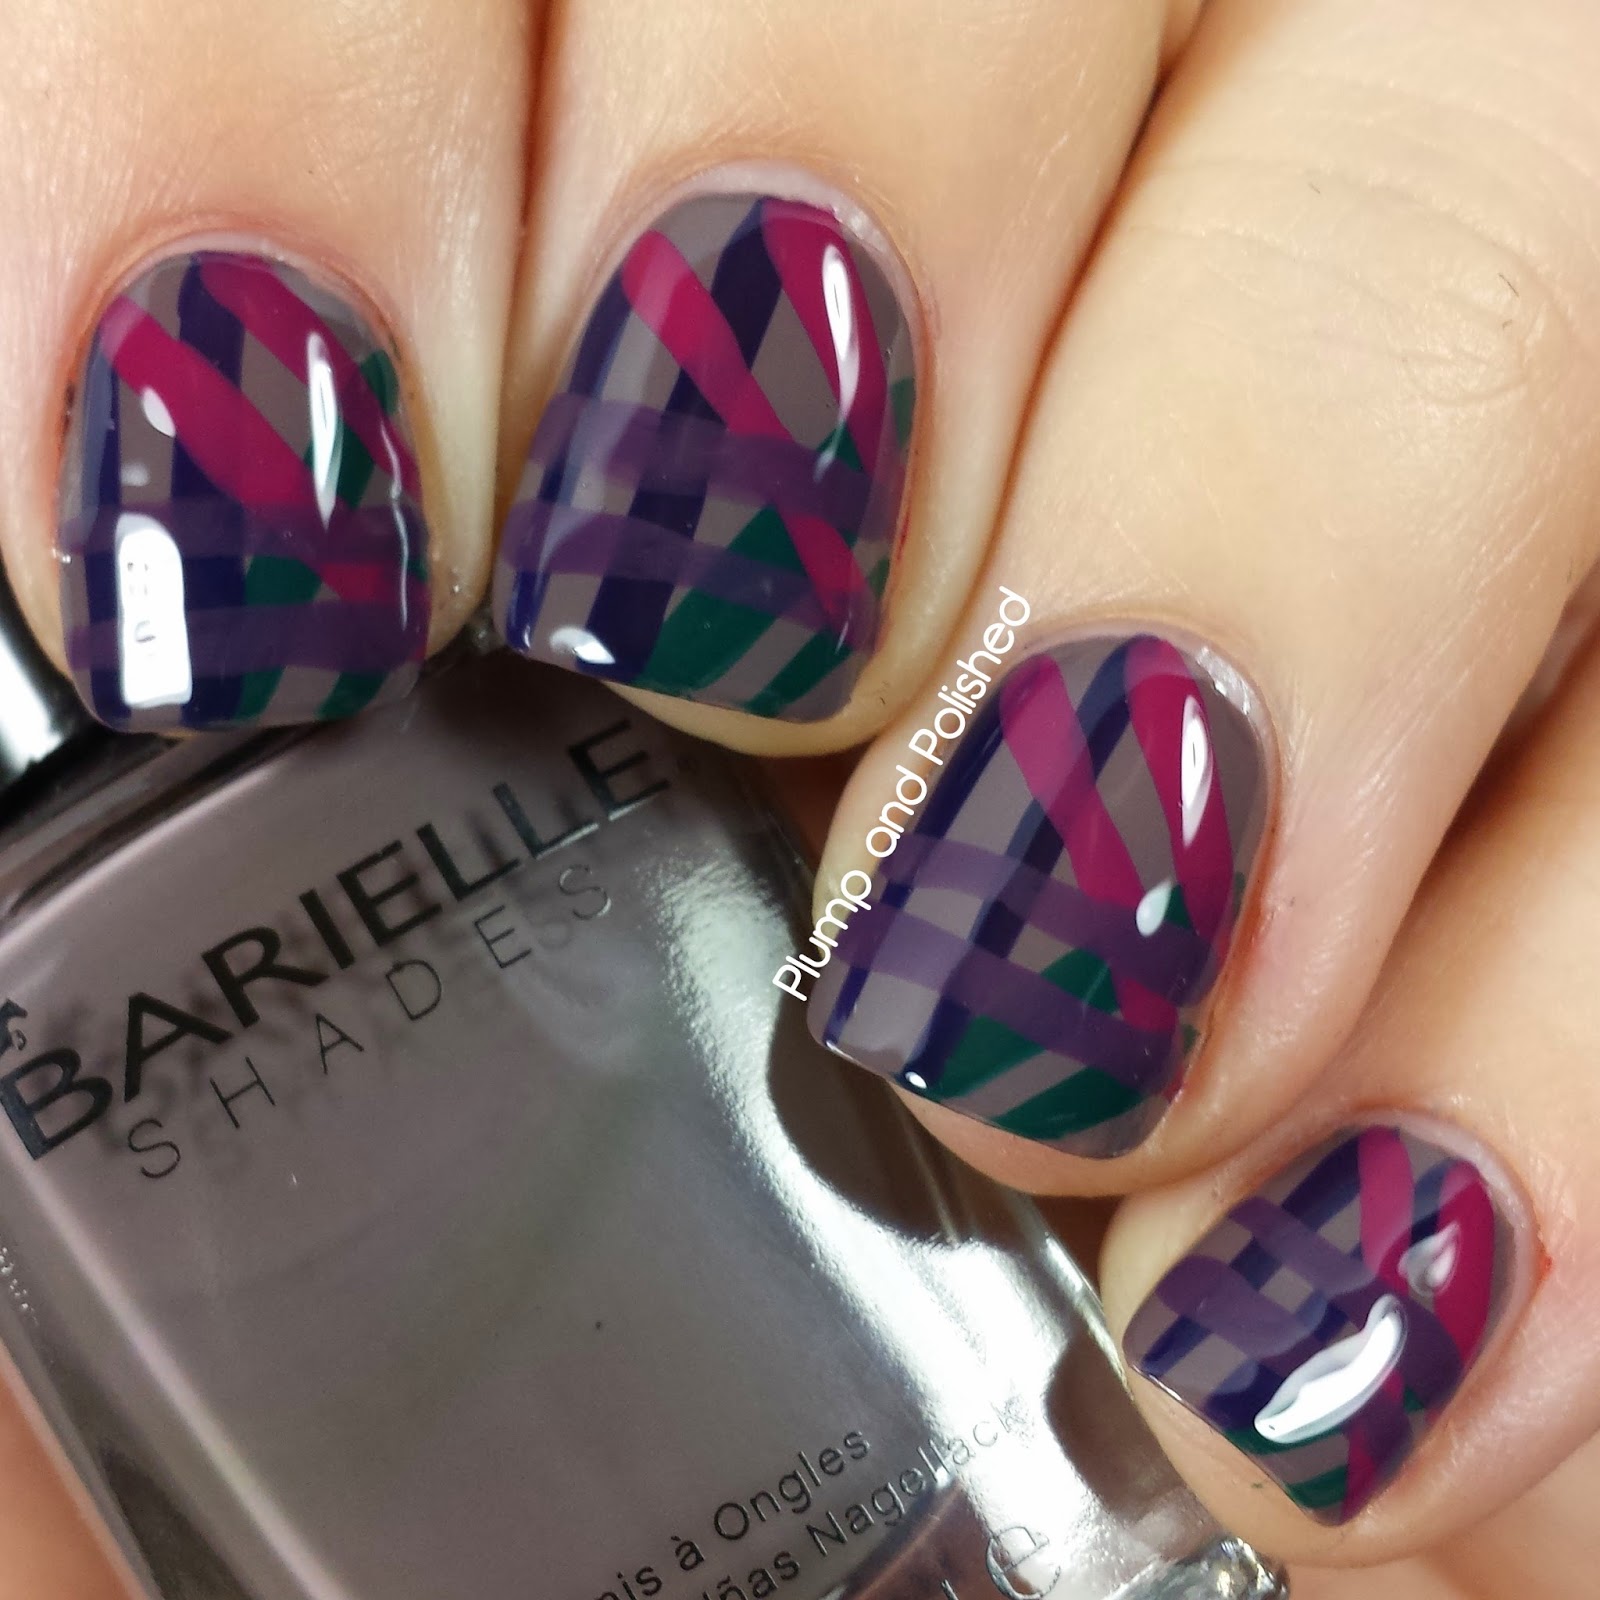 Barielle - Me Couture